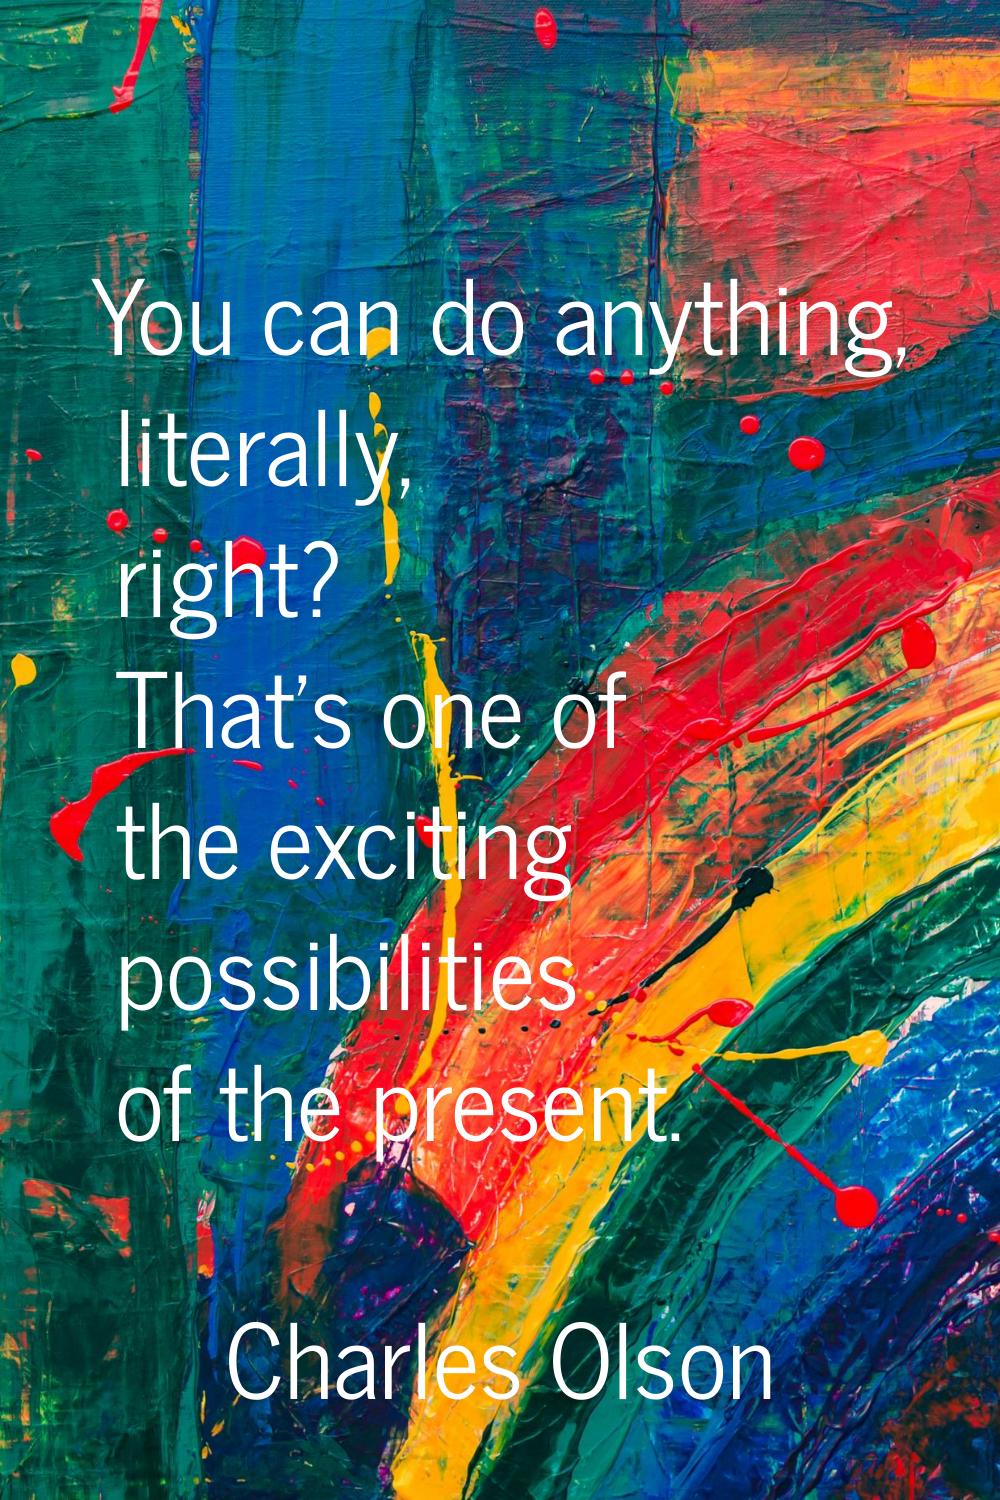 You can do anything, literally, right? That's one of the exciting possibilities of the present.